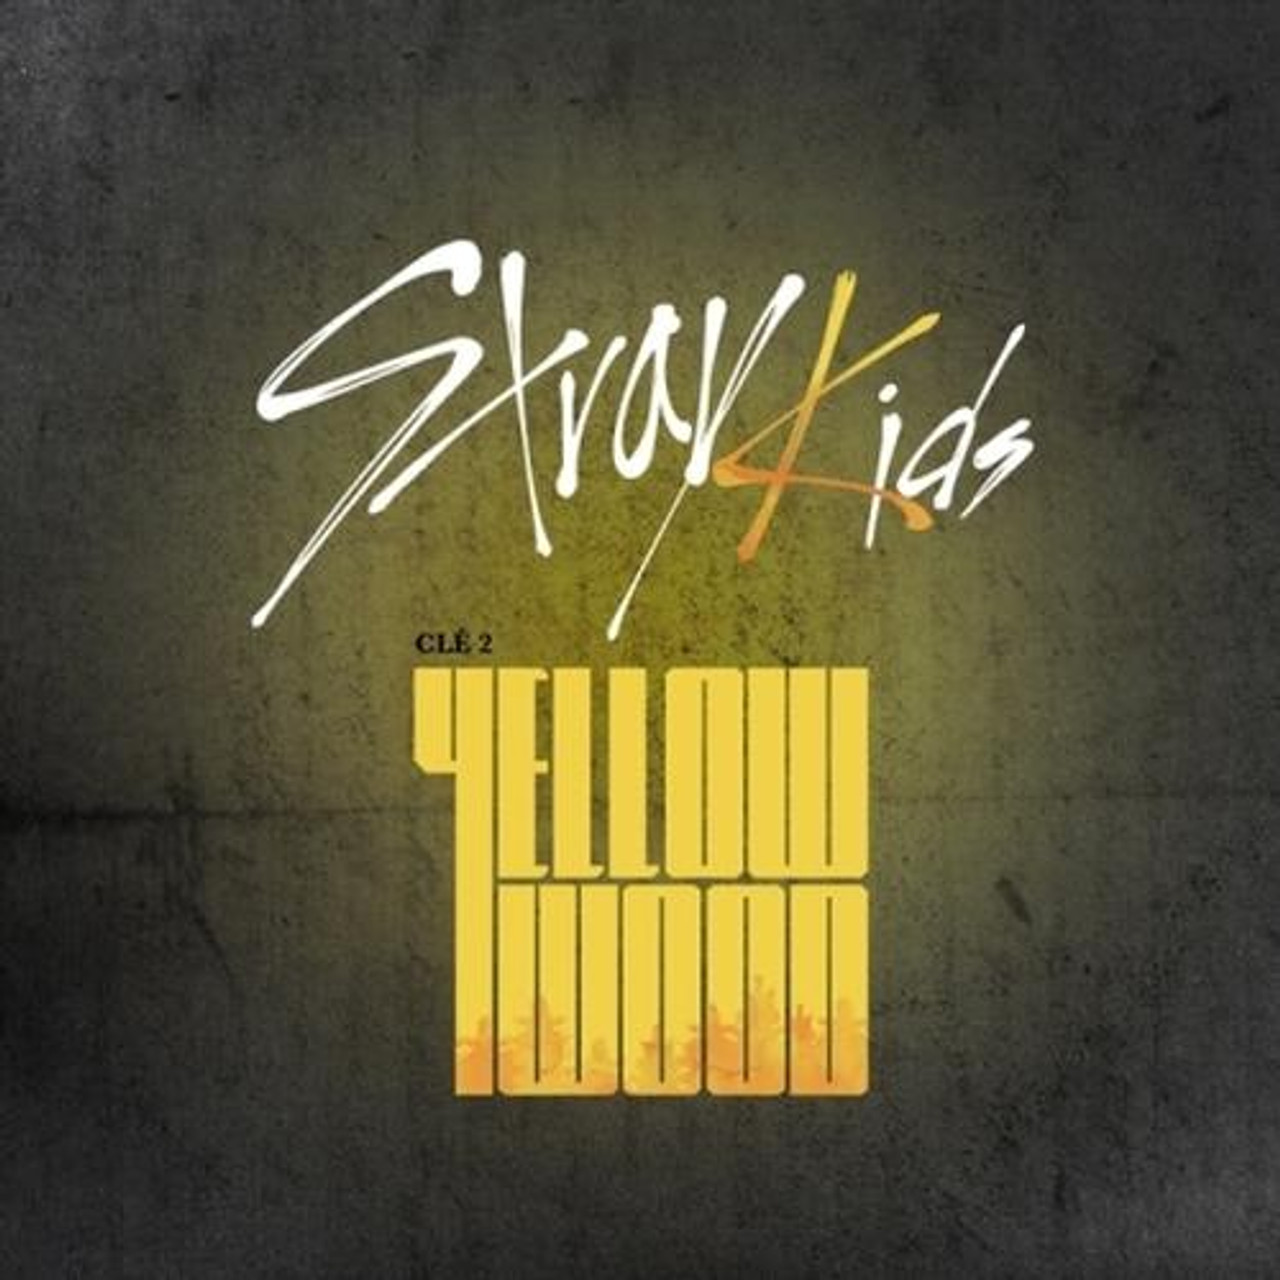 Stray Kids  Special Album Cle 2  Yellow Wood  Normal Edition  Random version